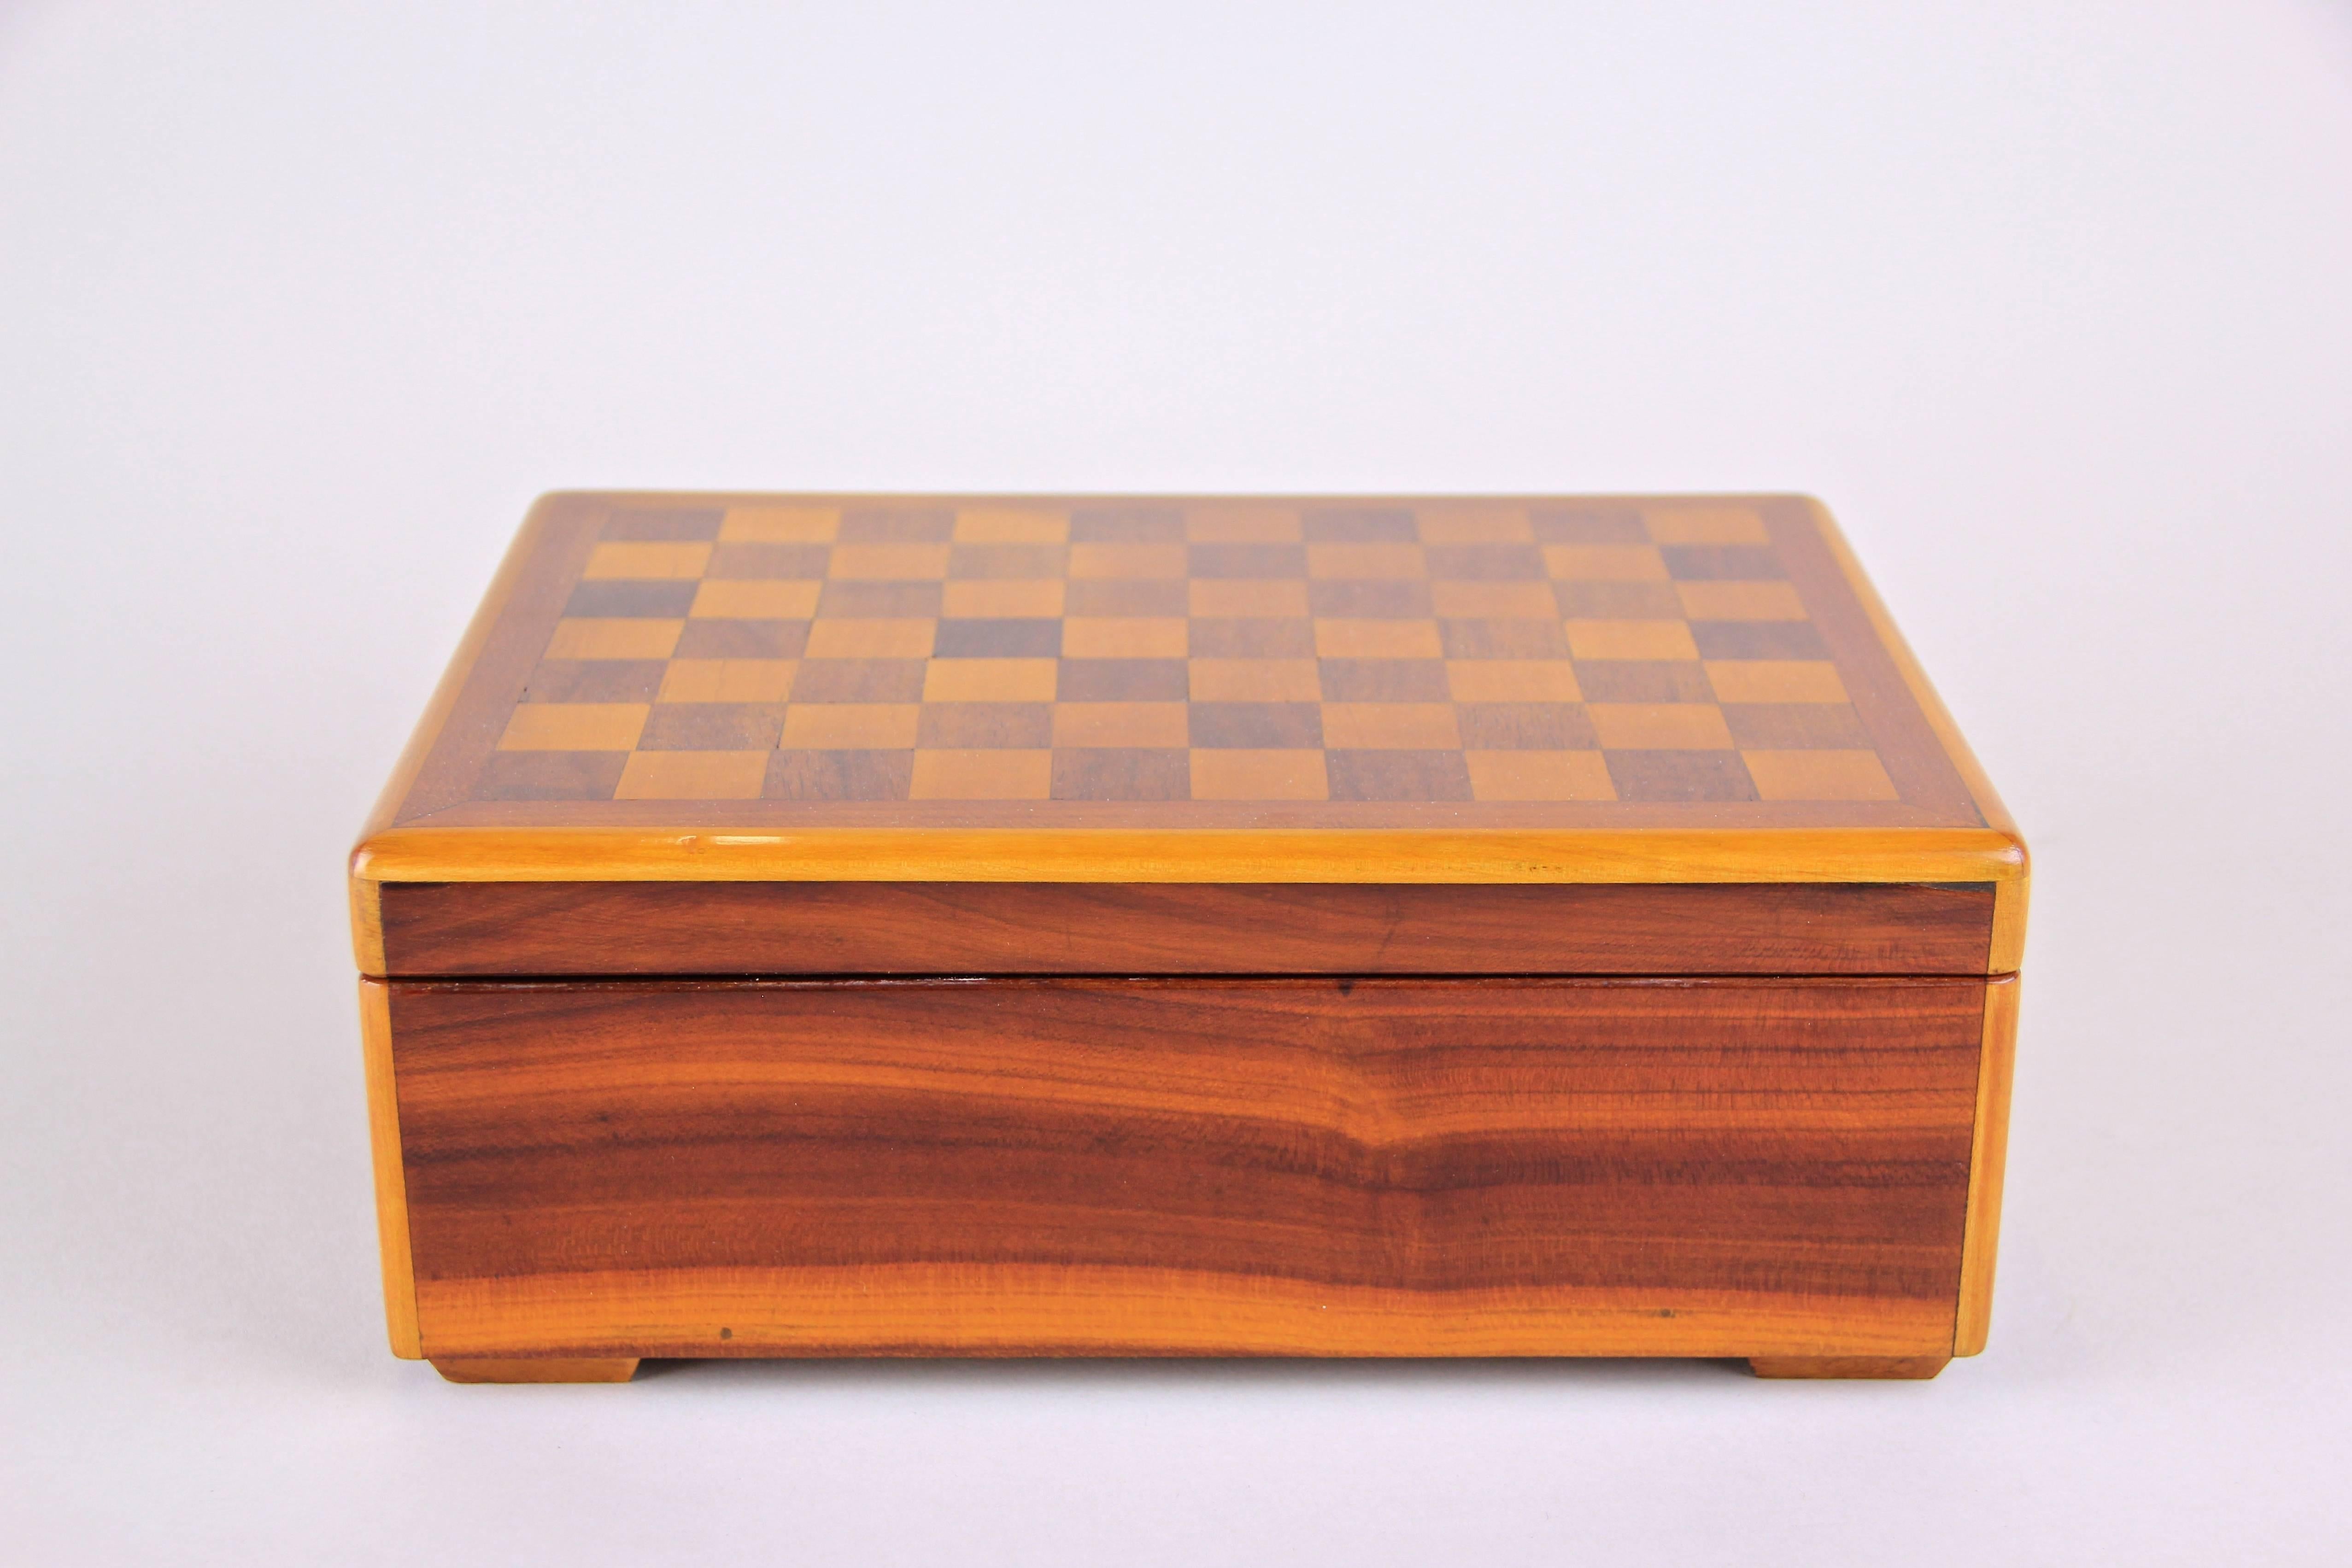 Adorable Art Deco Jewelry Box from the early 20th century in Austria. Made of fine solid cherrywood, this wooden box stands out with clear lines, beautiful maple bordered edges and an inlayed nut wood chessboard design on the lid. Inside the box you